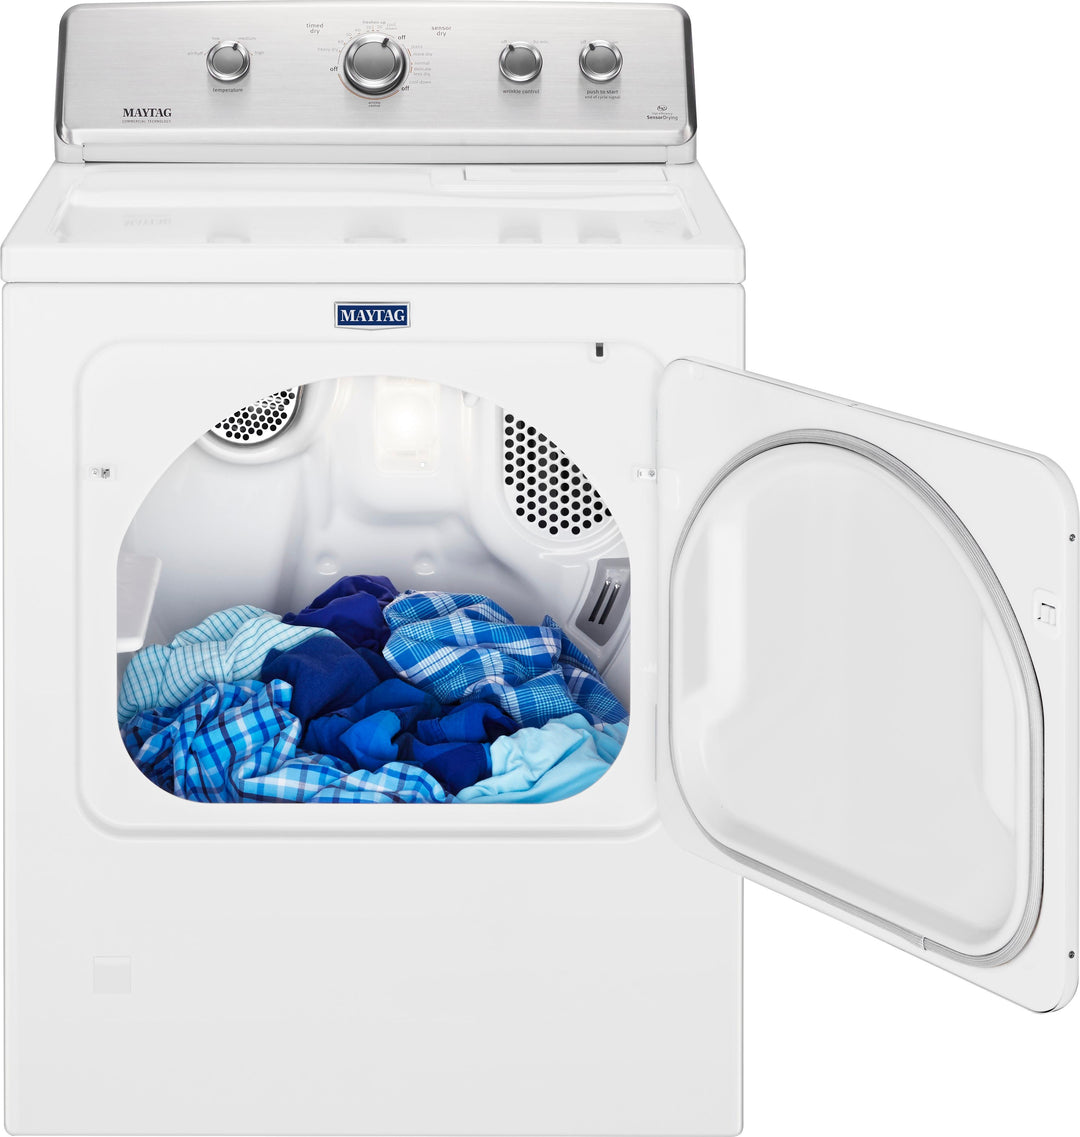 Maytag - 7 Cu. Ft. Electric Dryer with Wrinkle Control Option - White_2